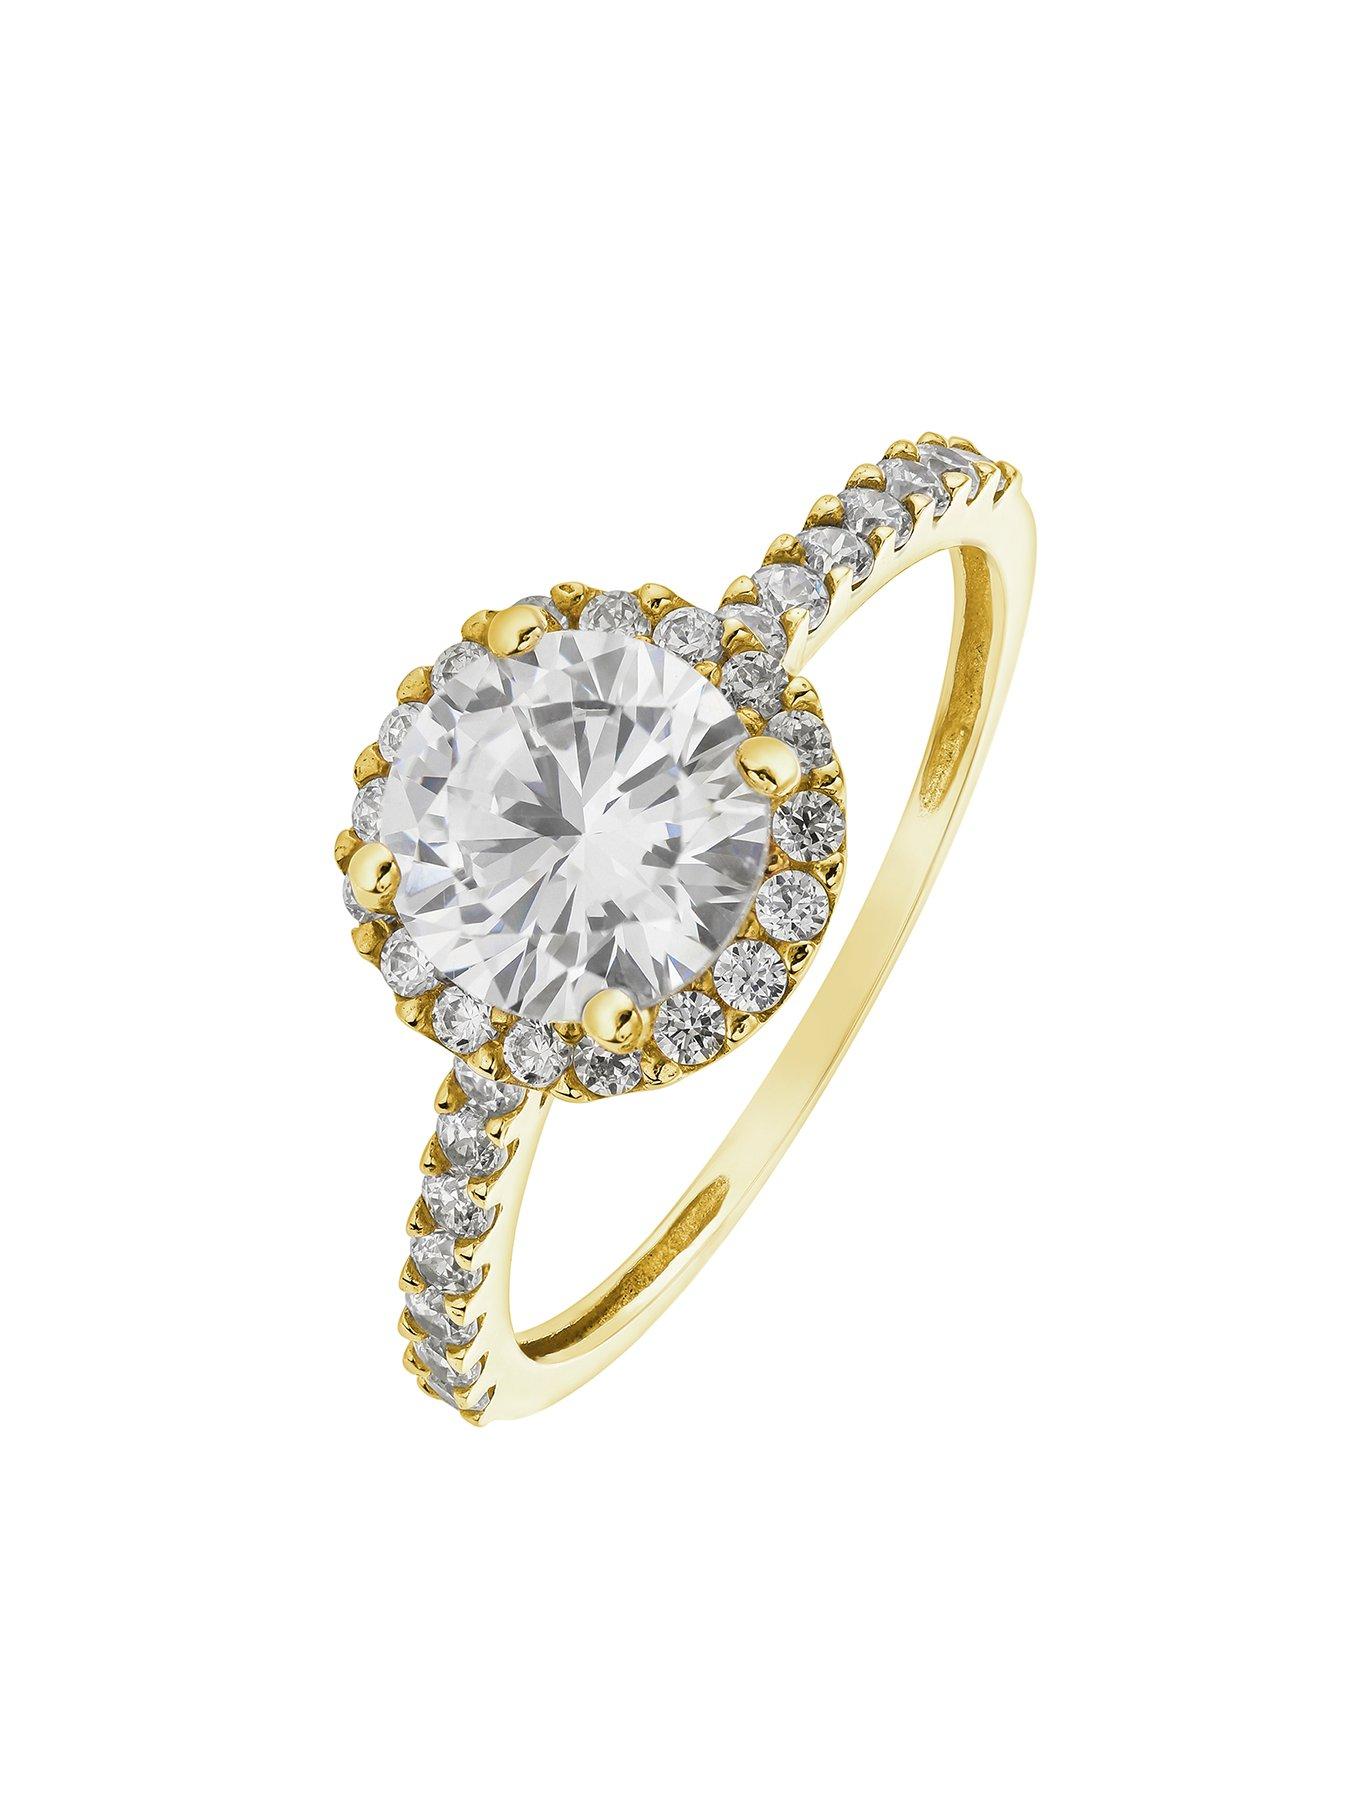 Details about   14K Yellow Gold 0.2ct Diamond Engagement Wedding Ring Semi Mount Round Cut 7-8mm 